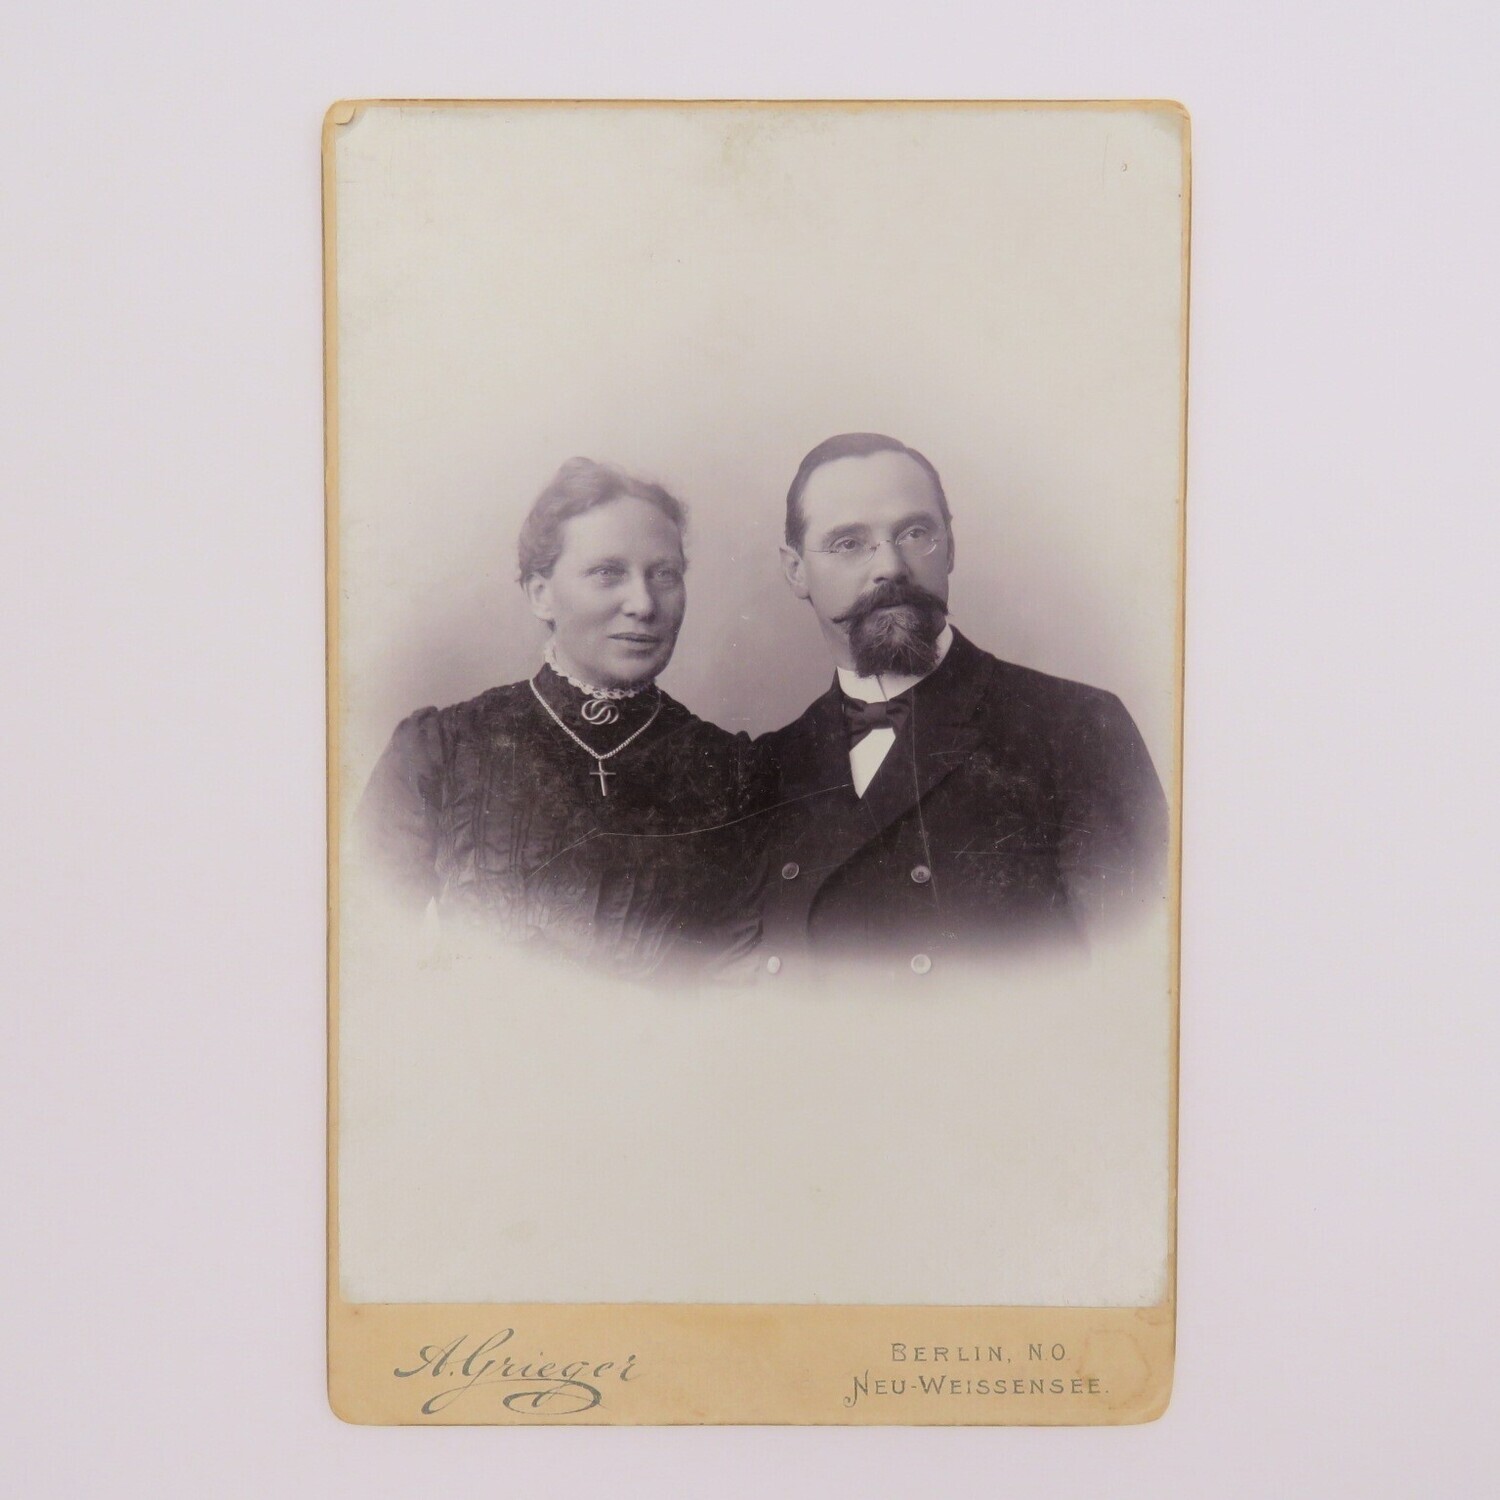 Photo taken 1902 in Berlin, Germany of Reverend Schmidt and his wife who later emigrated to South Africa